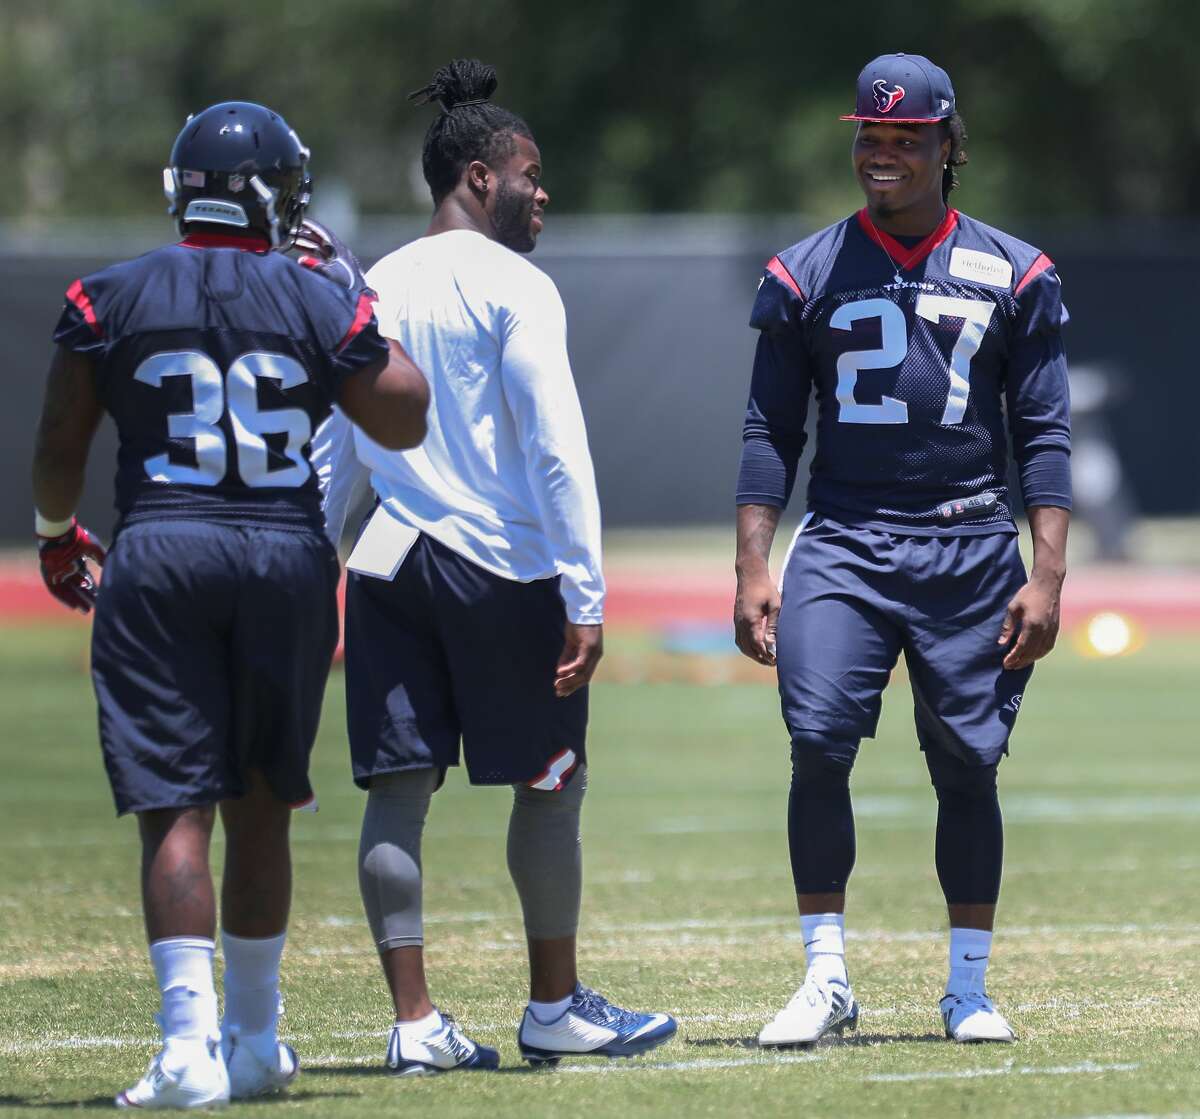 D'Onta Foreman (right) prepares to run through drills during Texans rookie camp at NRG practice field Saturday, May 13, 2017, in Houston. ( Steve Gonzales / Houston Chronicle )